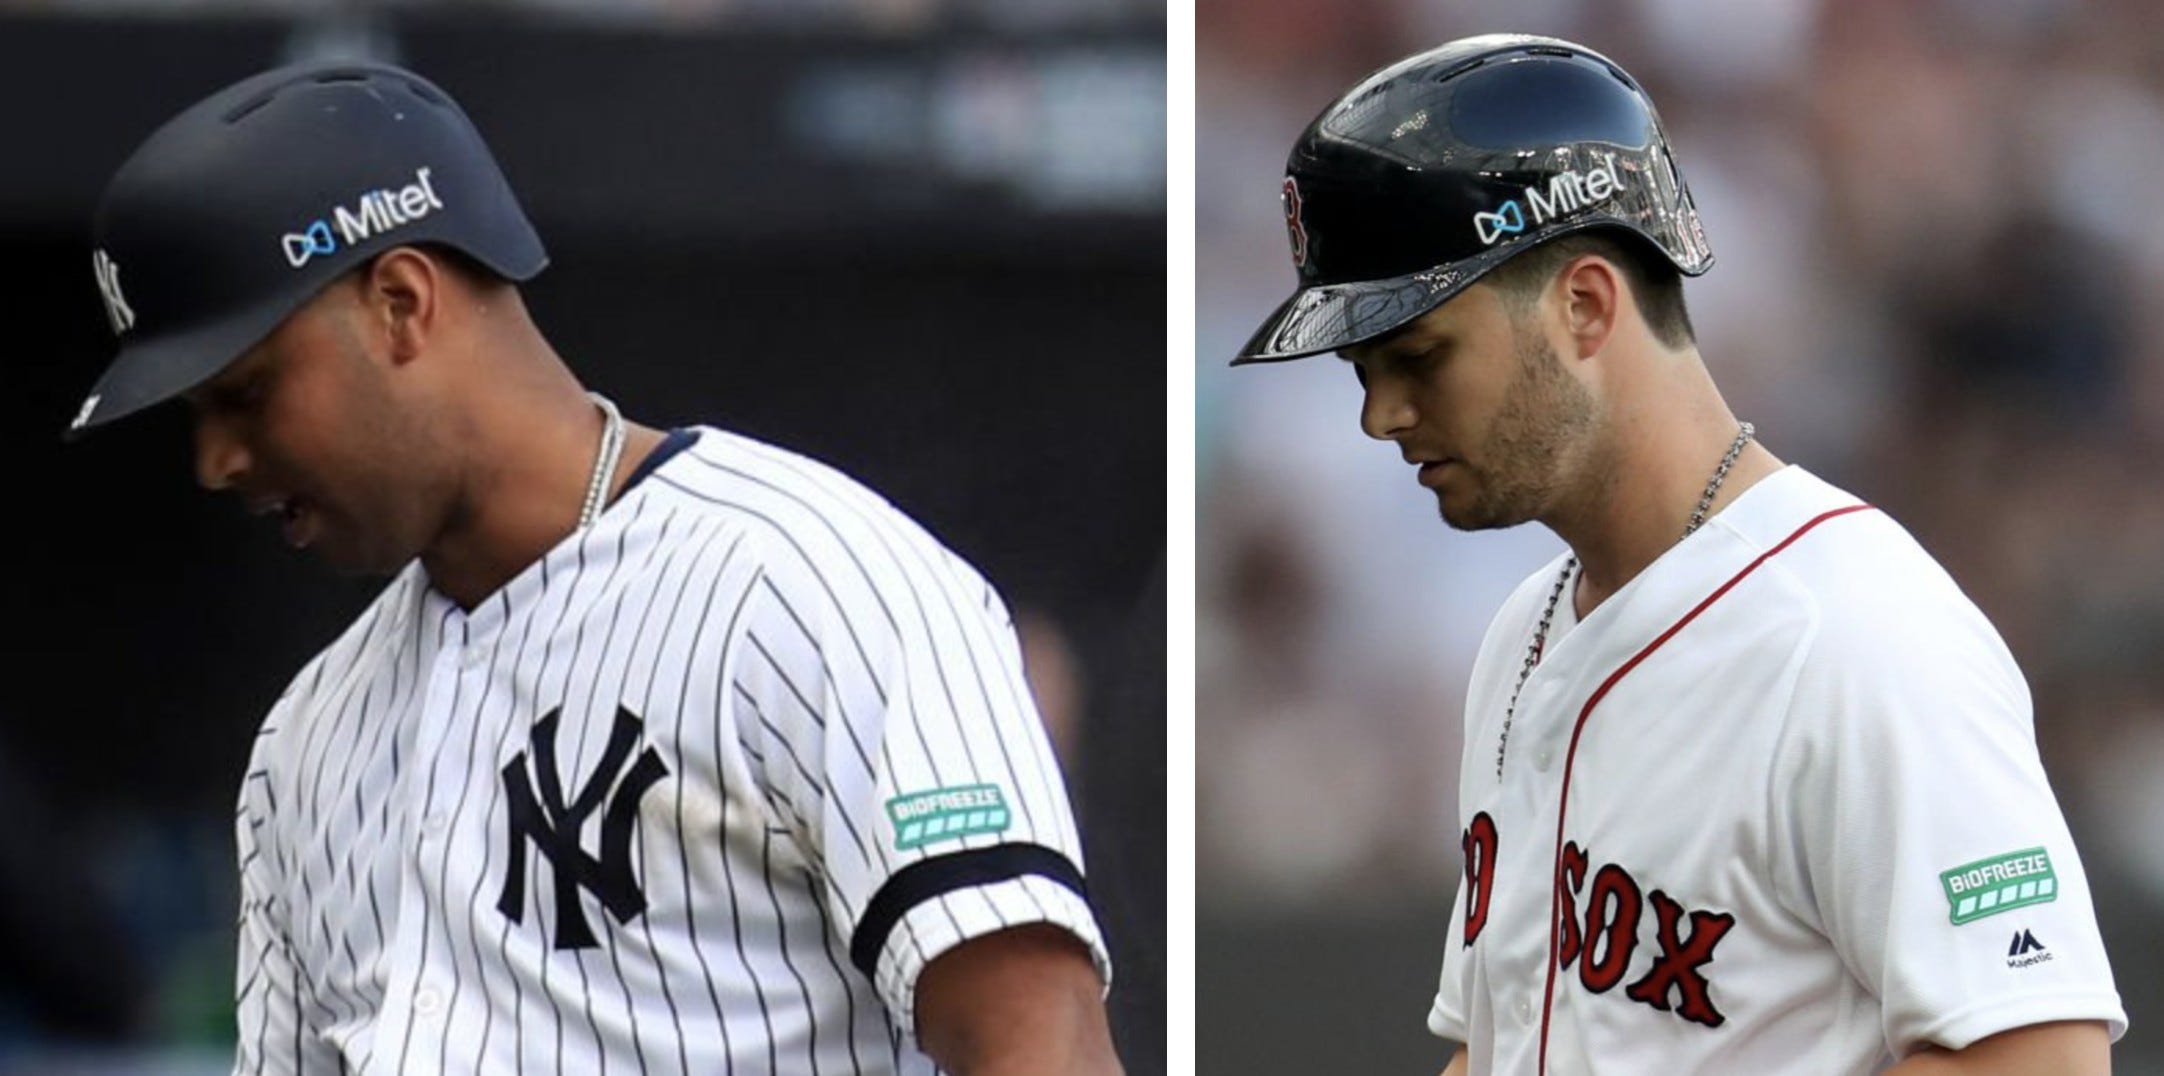 MLB once again using uni ads for non-USA games, as Yanks will wear